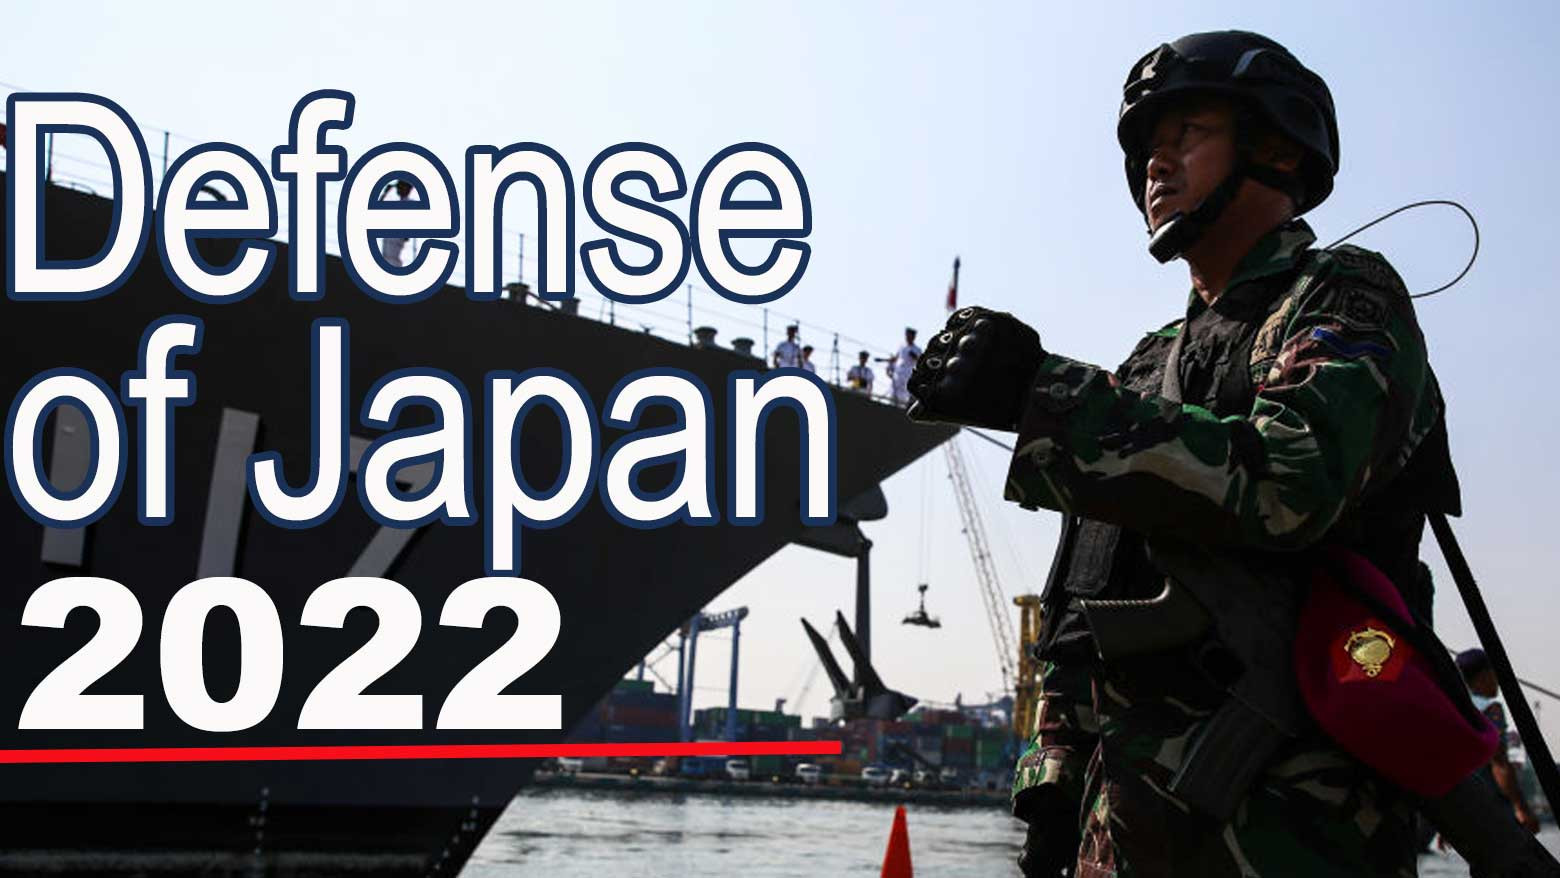 Japan's annual defense report focuses on Russia, China, Taiwan